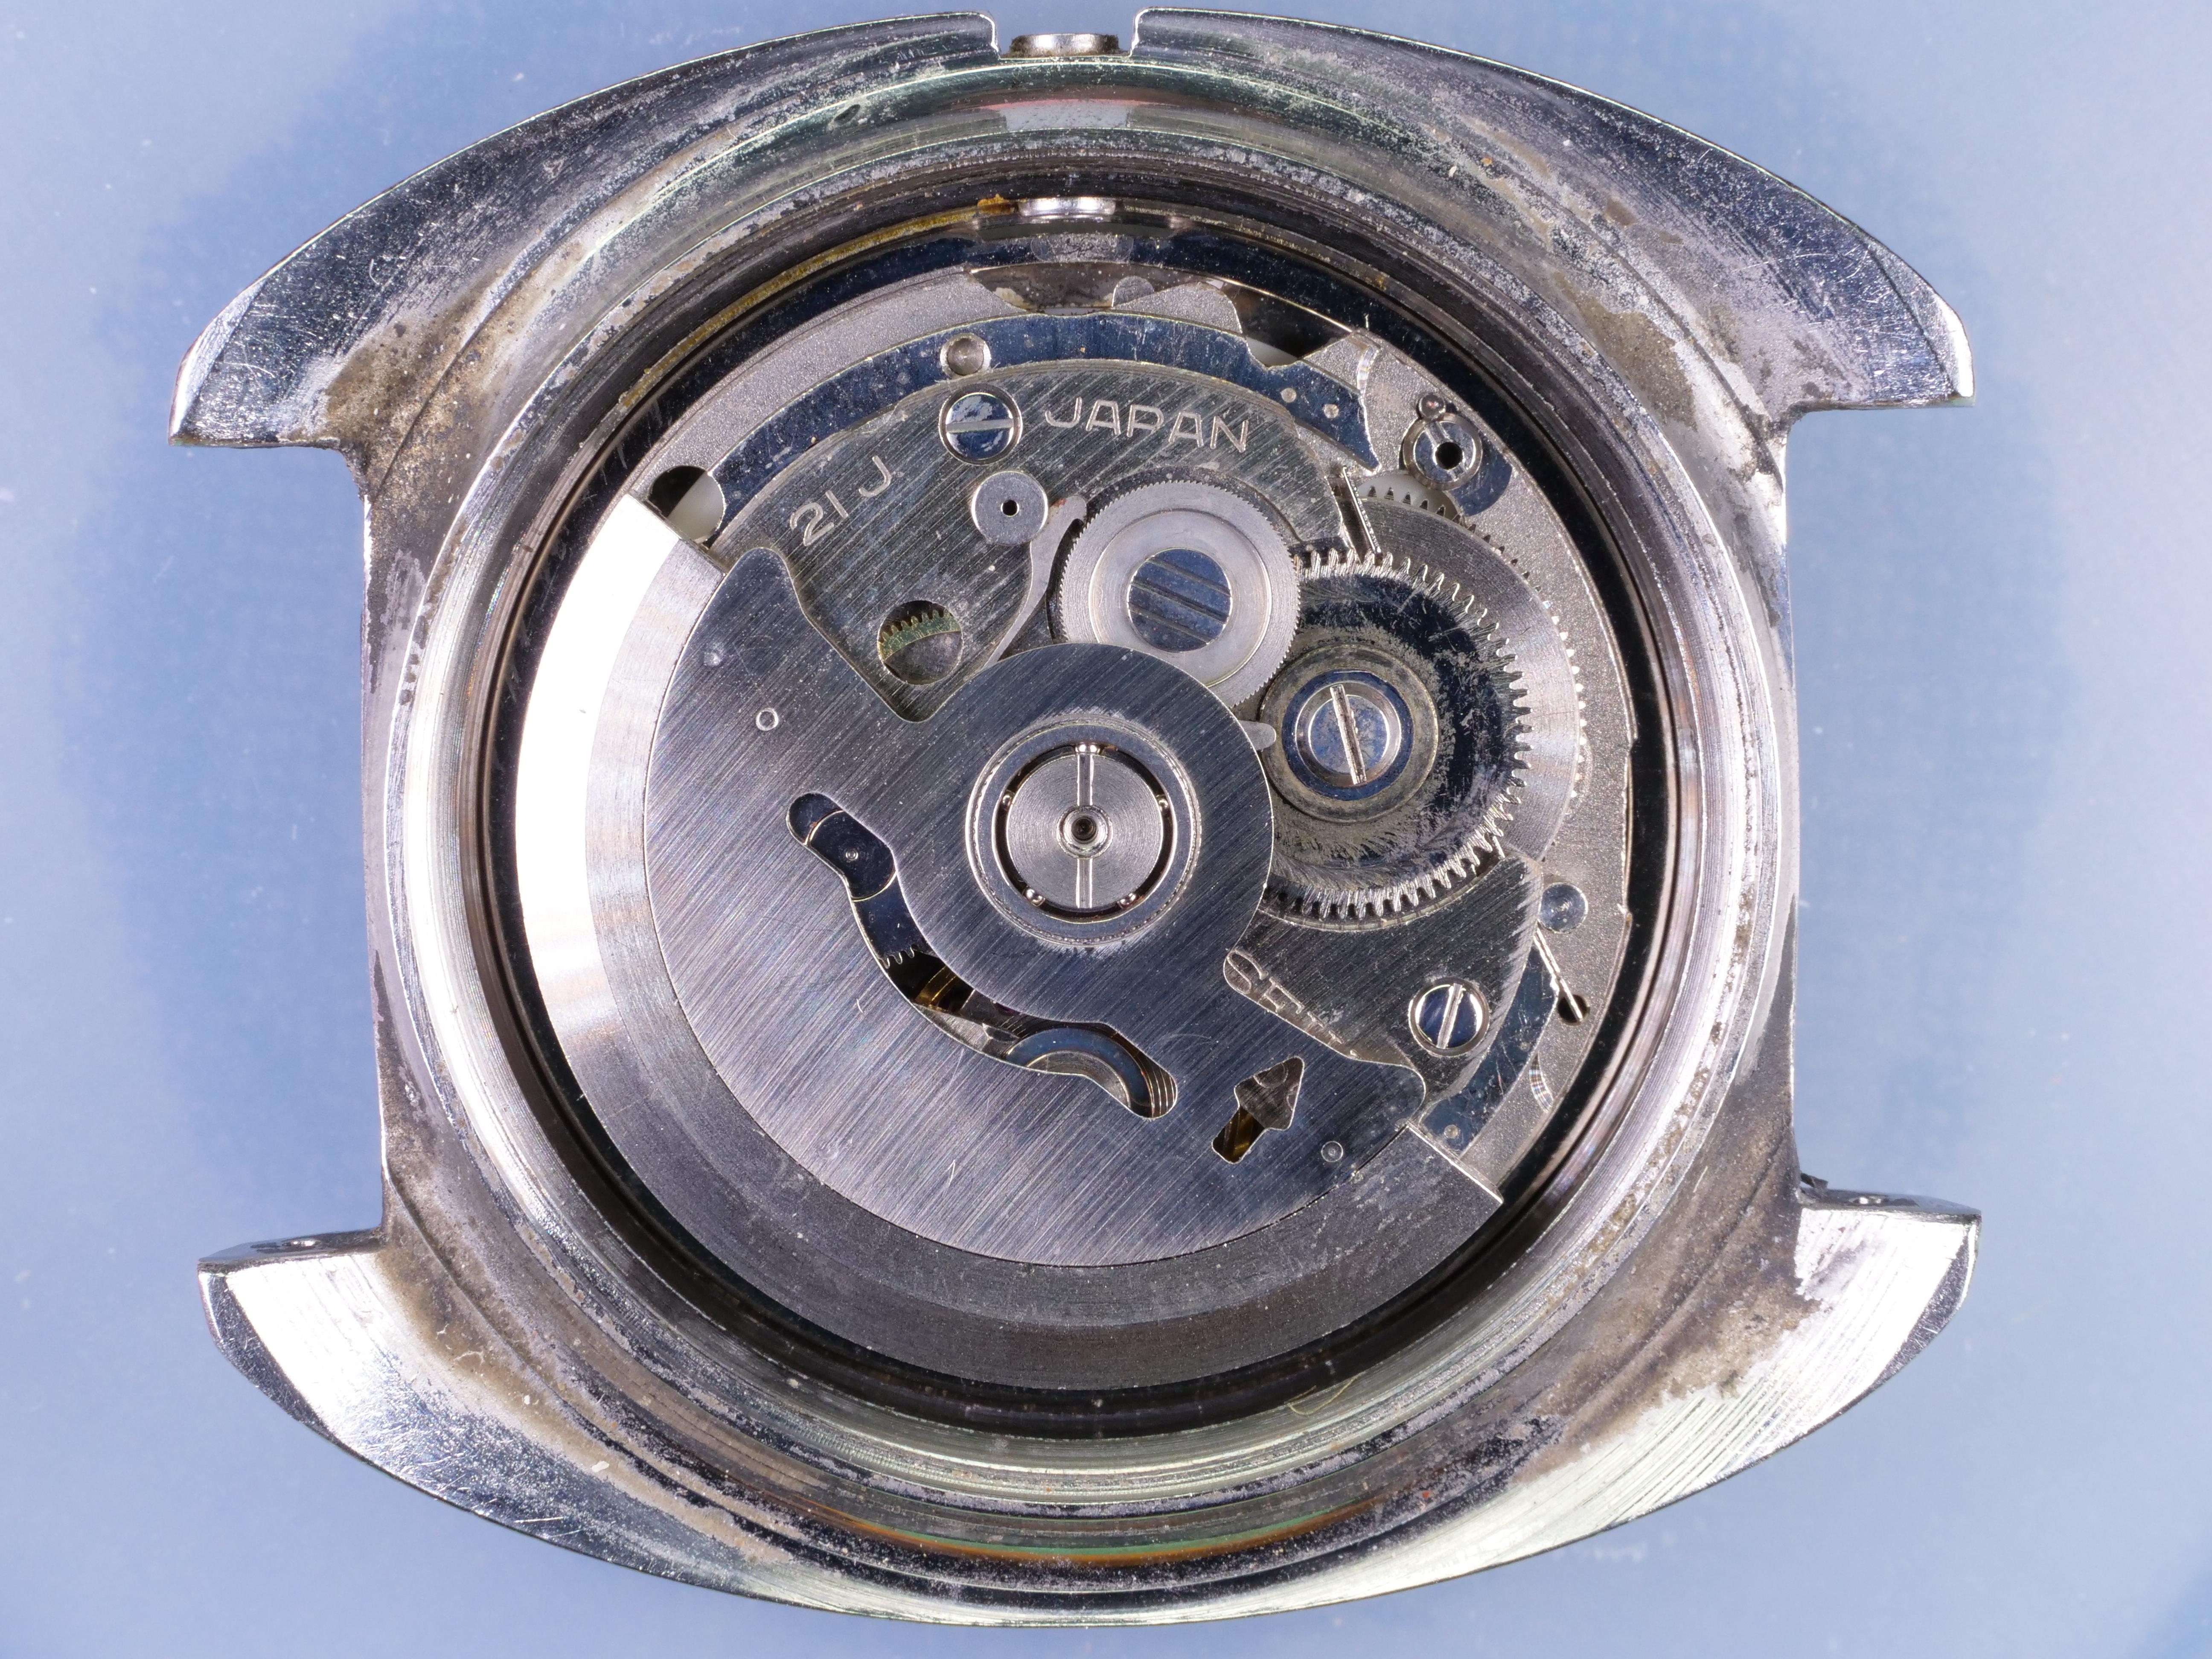 Seiko 7006-7002 (7006A) movement removal - Watch Case Issues, Opening,  Movement/Stem Removal, Case Parts, straps and bracelets - Watch Repair Talk